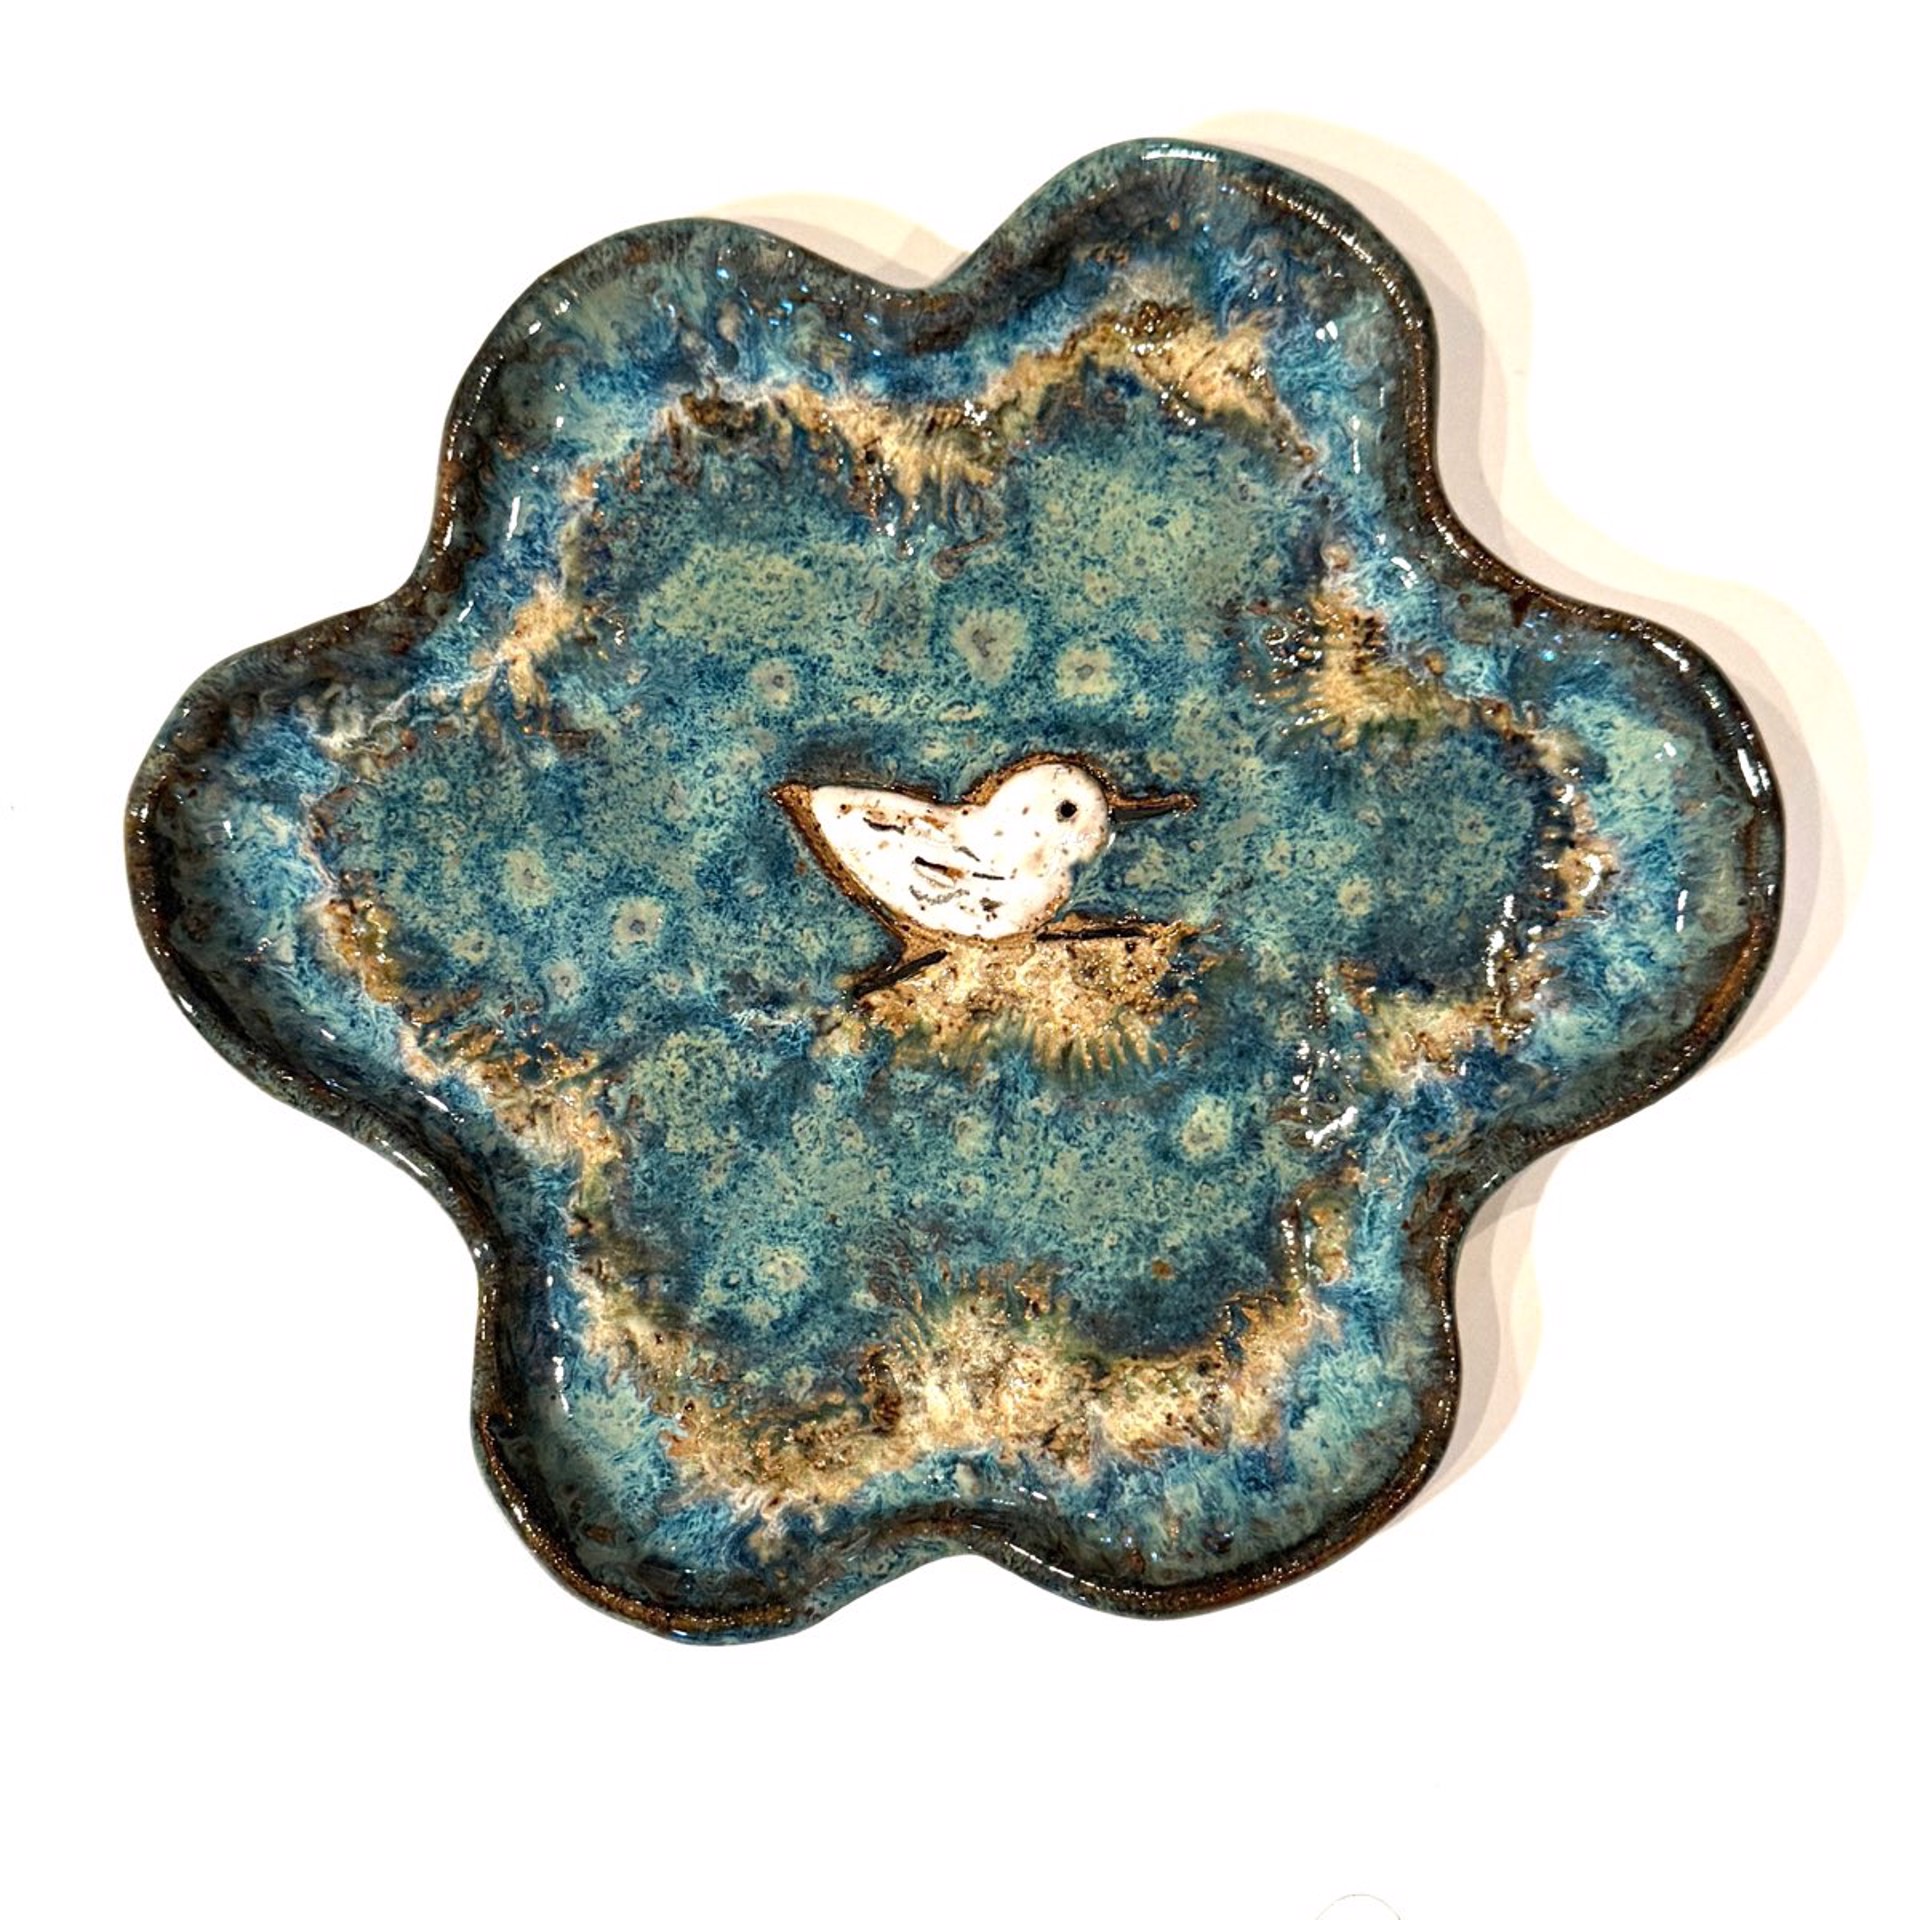 Small Plate with One Sandpiper (Blue Glaze) LG23-1174 by Jim & Steffi Logan